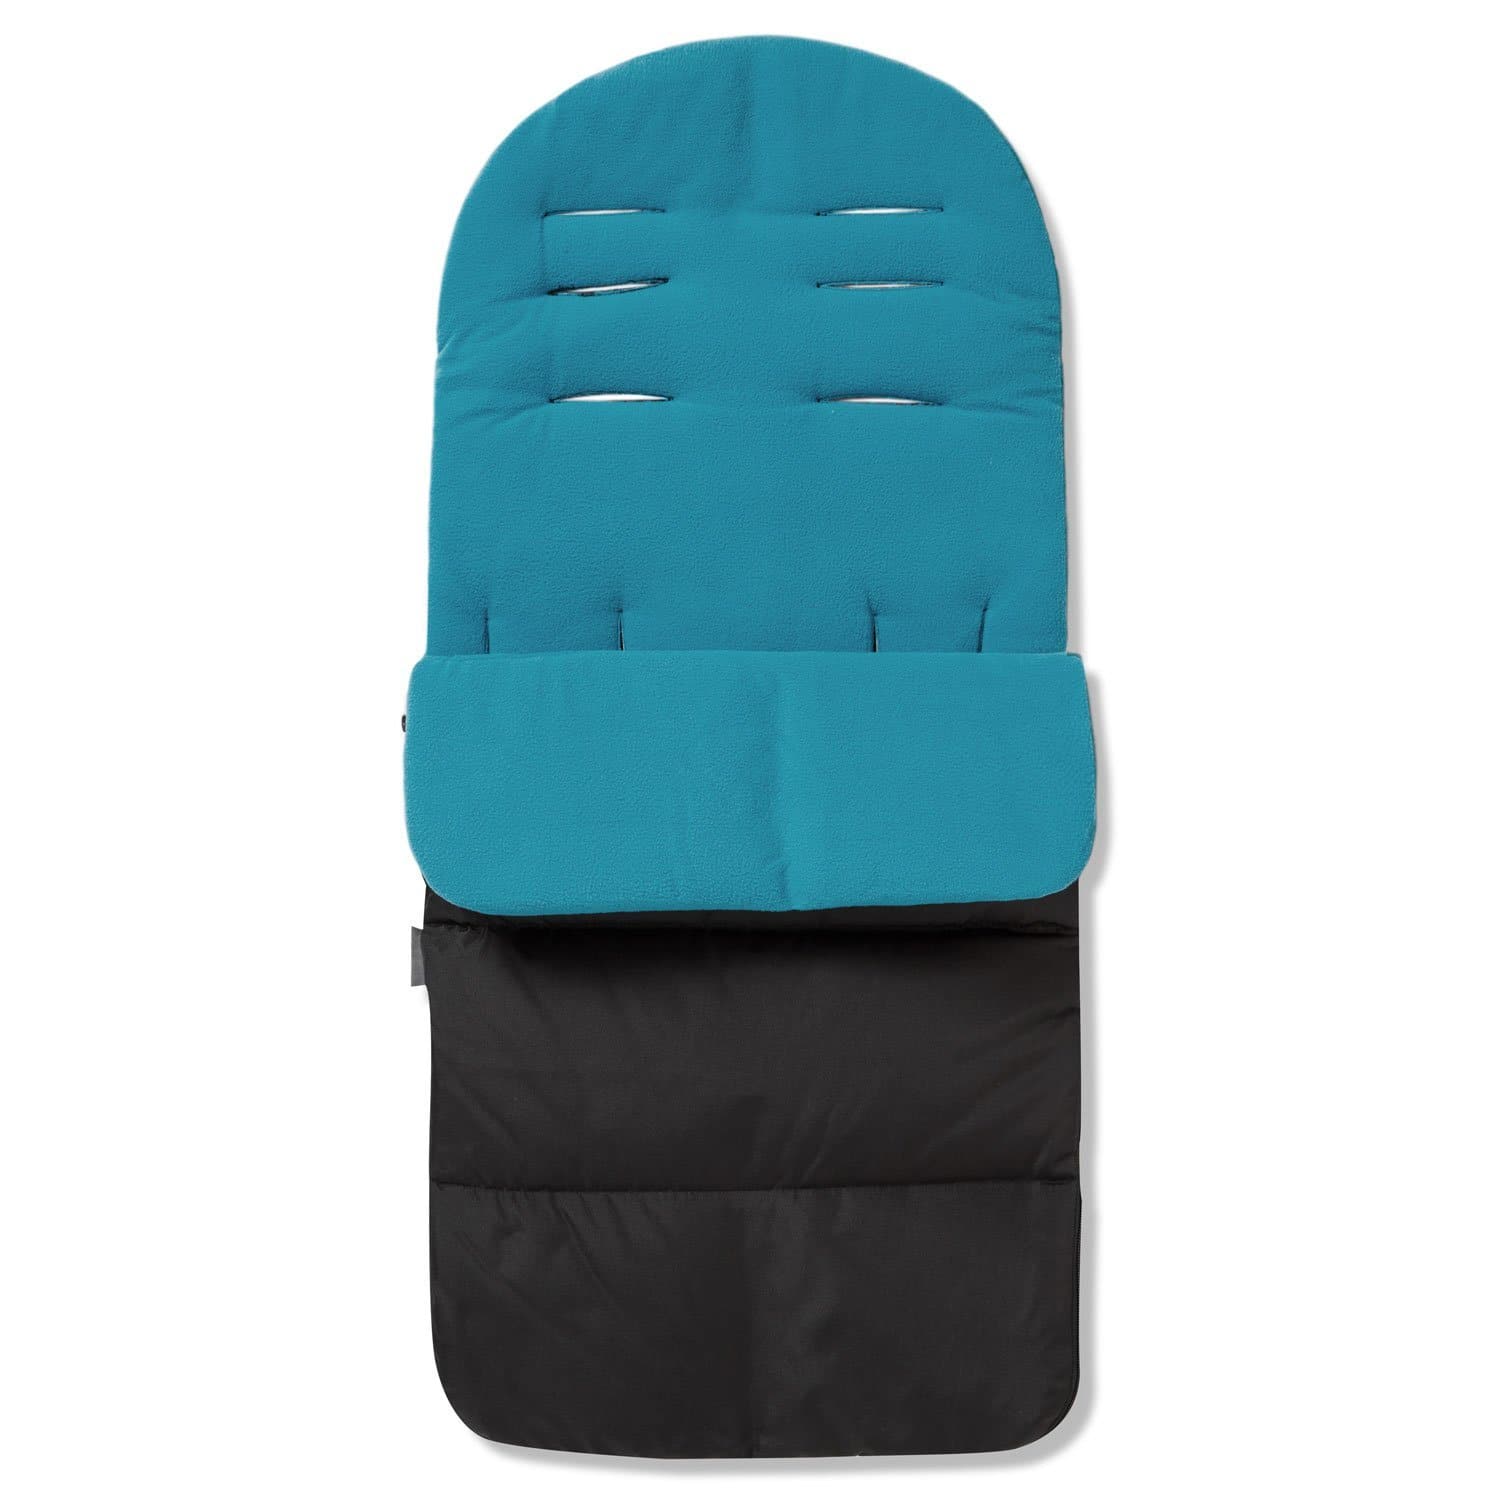 Premium Footmuff / Cosy Toes Compatible with Ickle Bubba - Ocean Blue / Fits All Models | For Your Little One